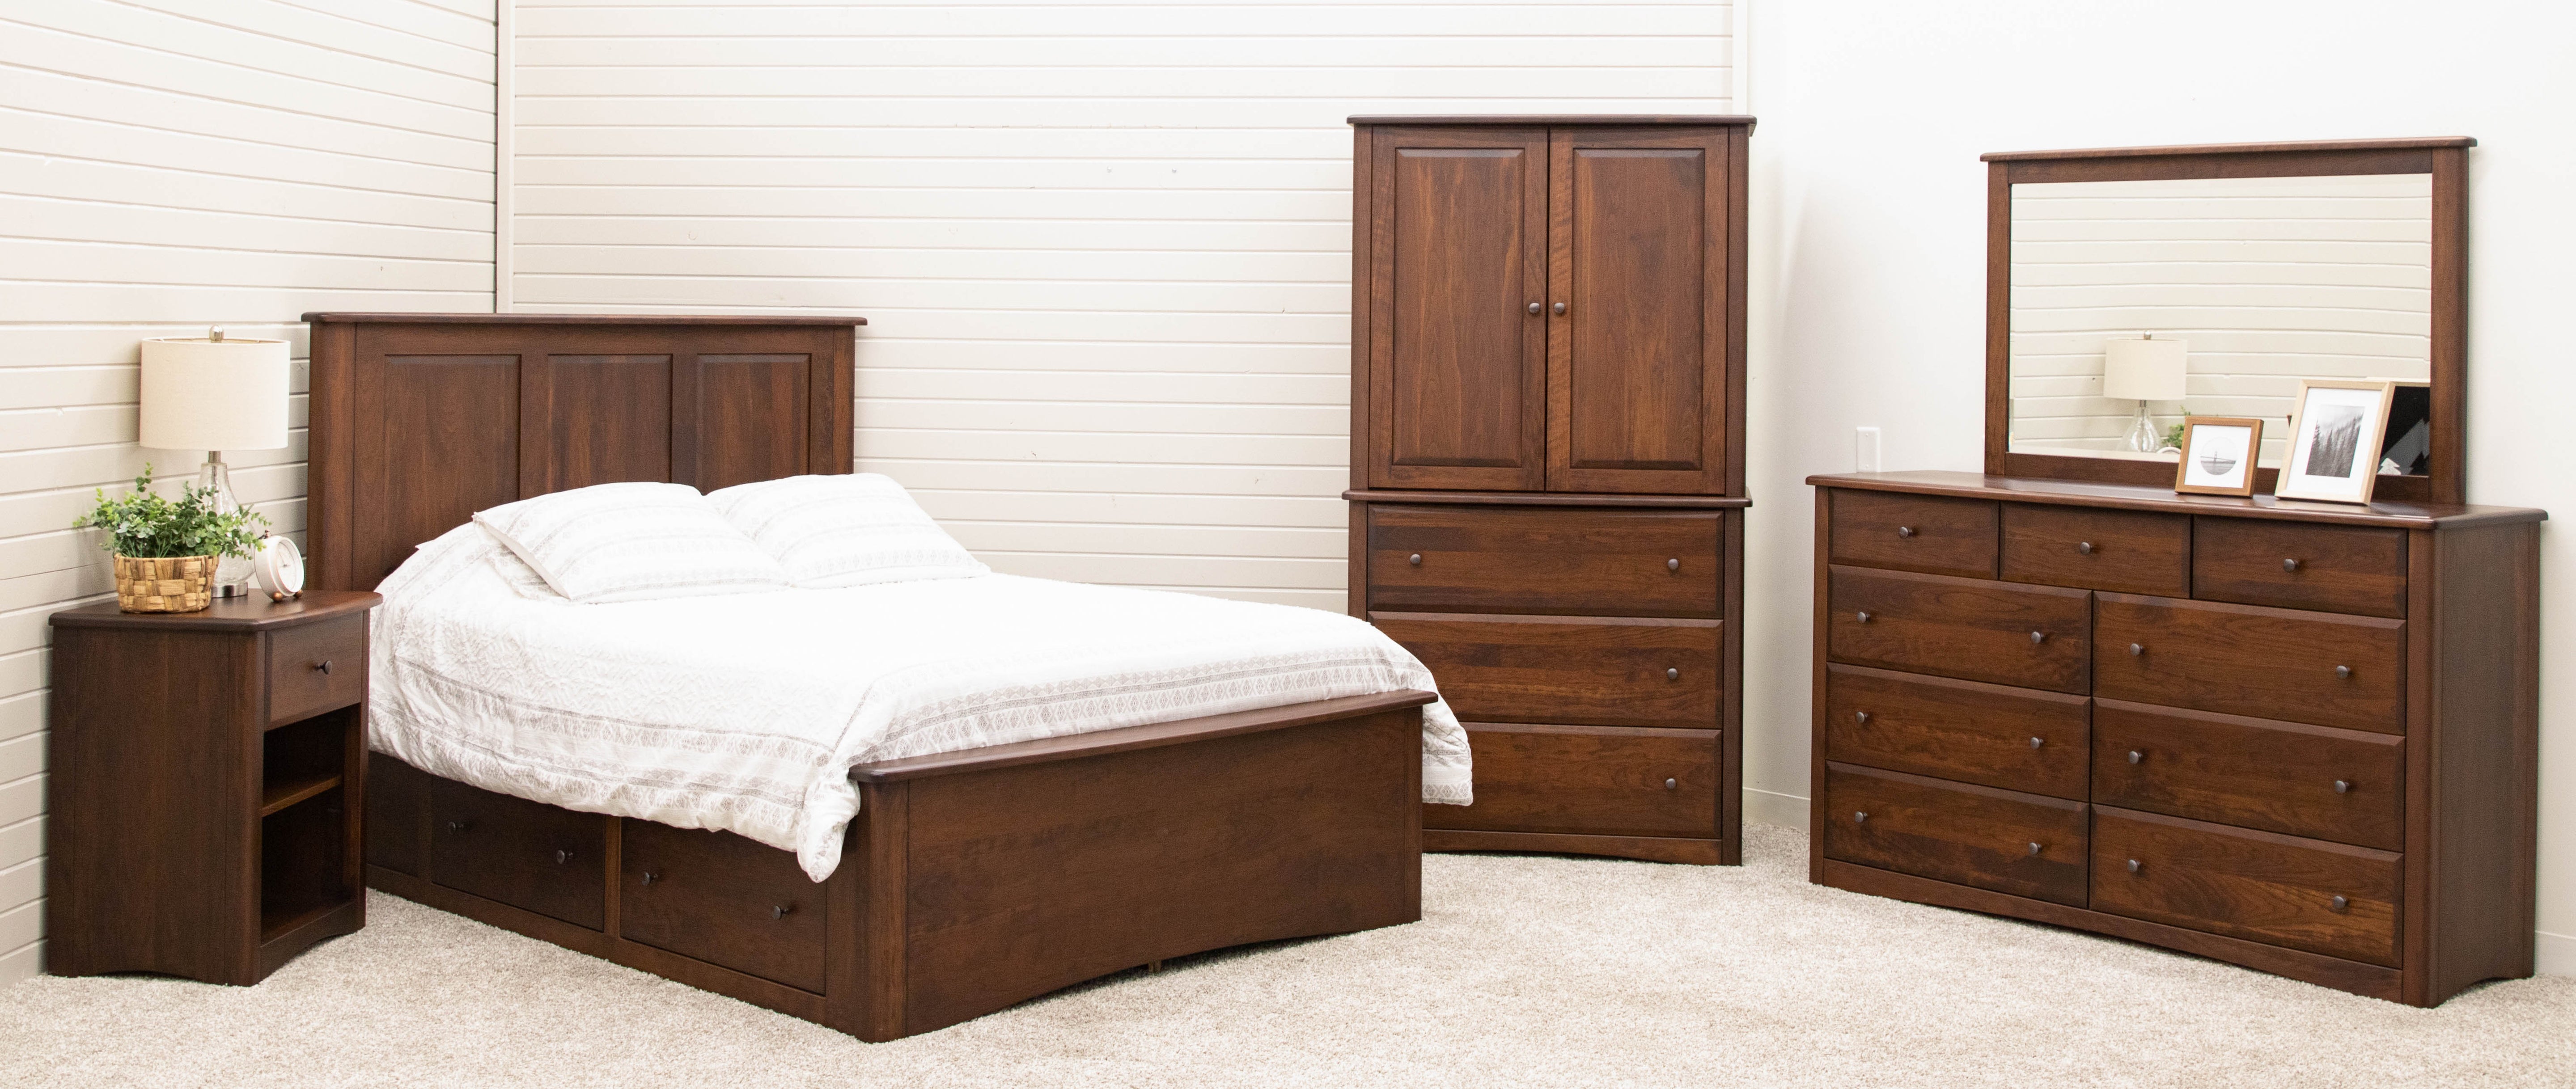 Carrington Traditional Bedroom Collection